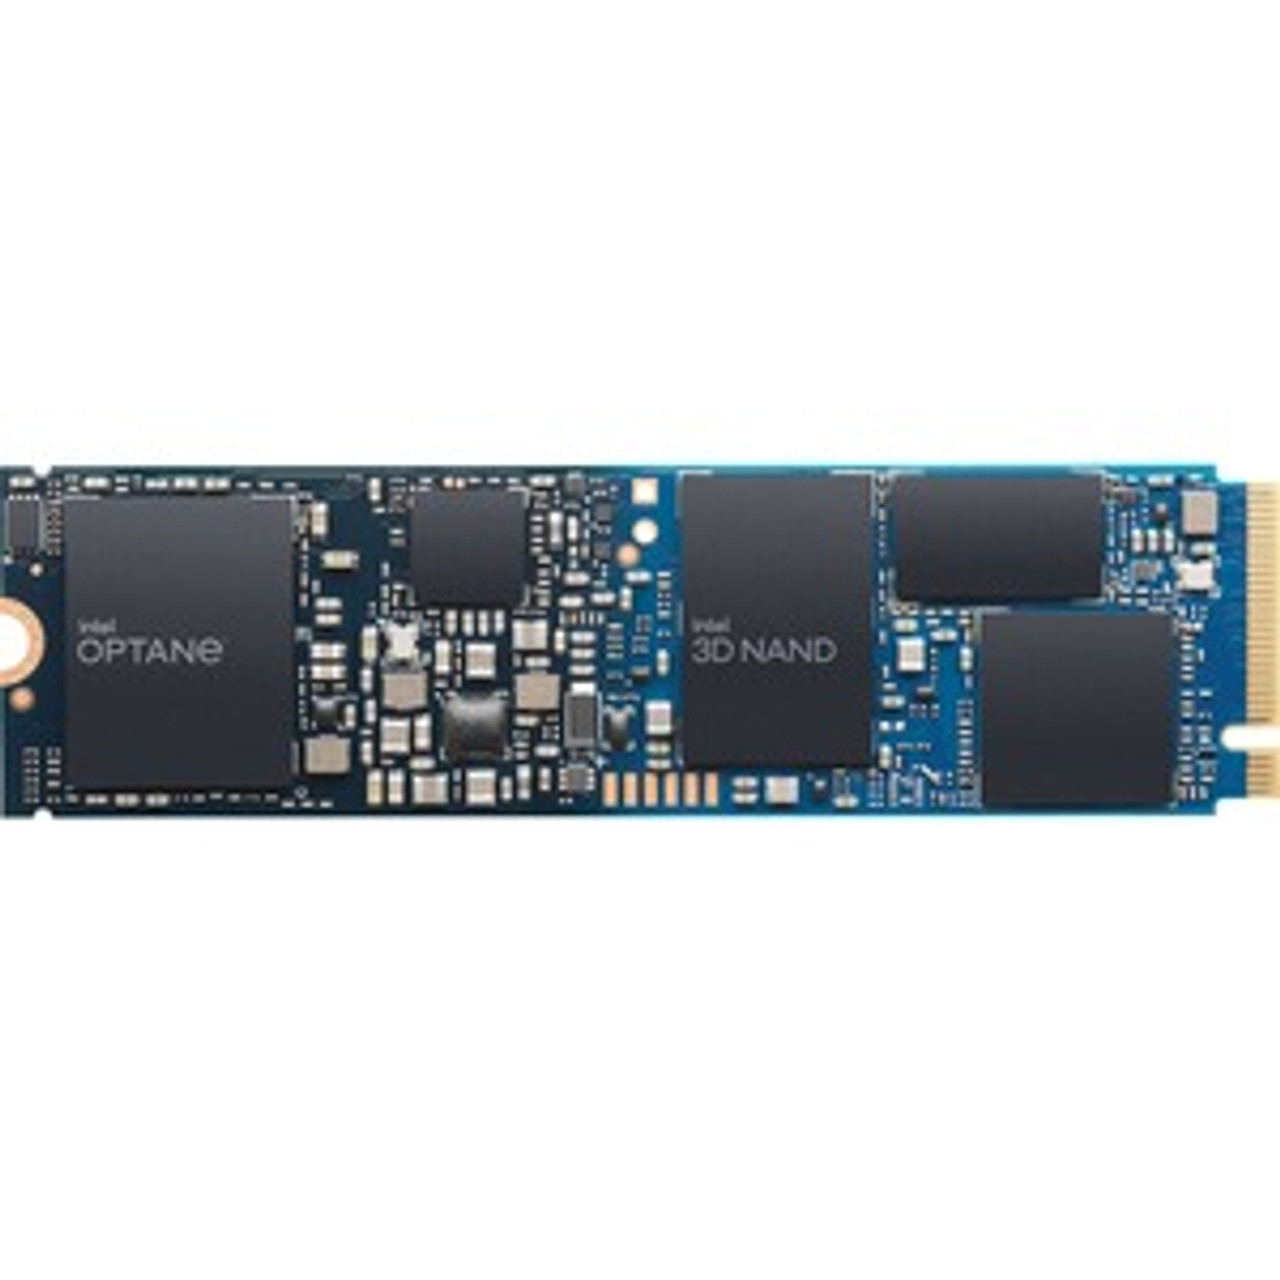 HBRPEKNL0202A01 Intel Optane H20 Series 512GB 3D XPoint PCI Express 3.1 x4 NVMe M.2 2280 Internal Solid State Drive (SSD)